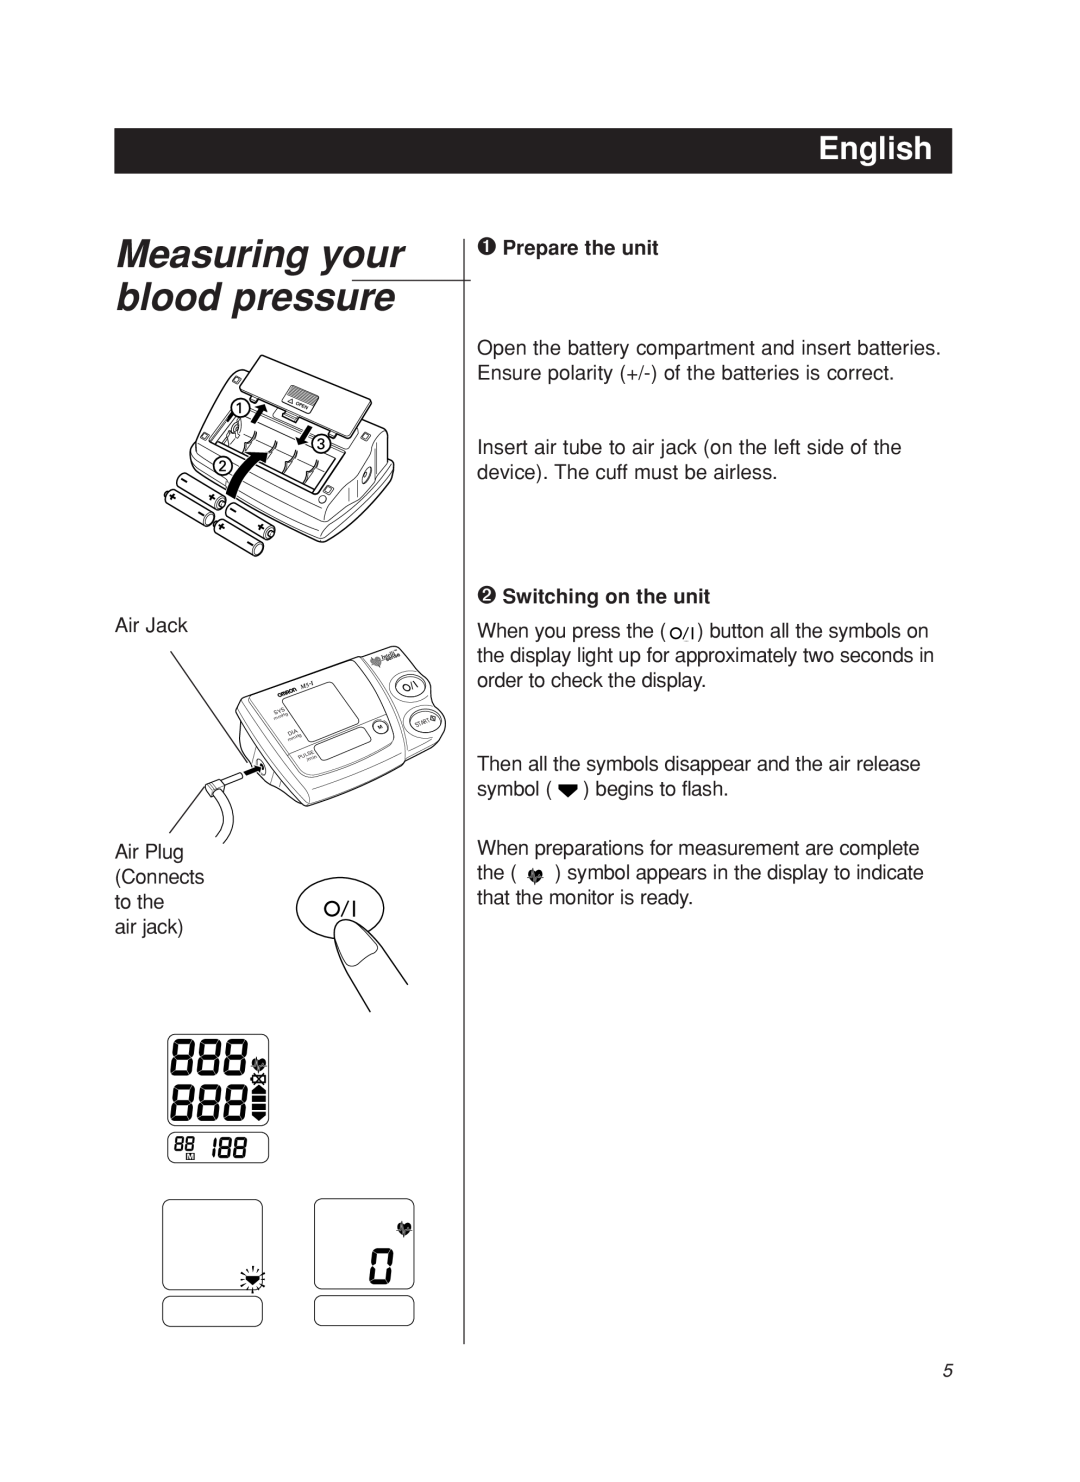 Omron M5-I instruction manual Measuring your, blood pressure, English, ➊ Prepare the unit, ➋ Switching on the unit 